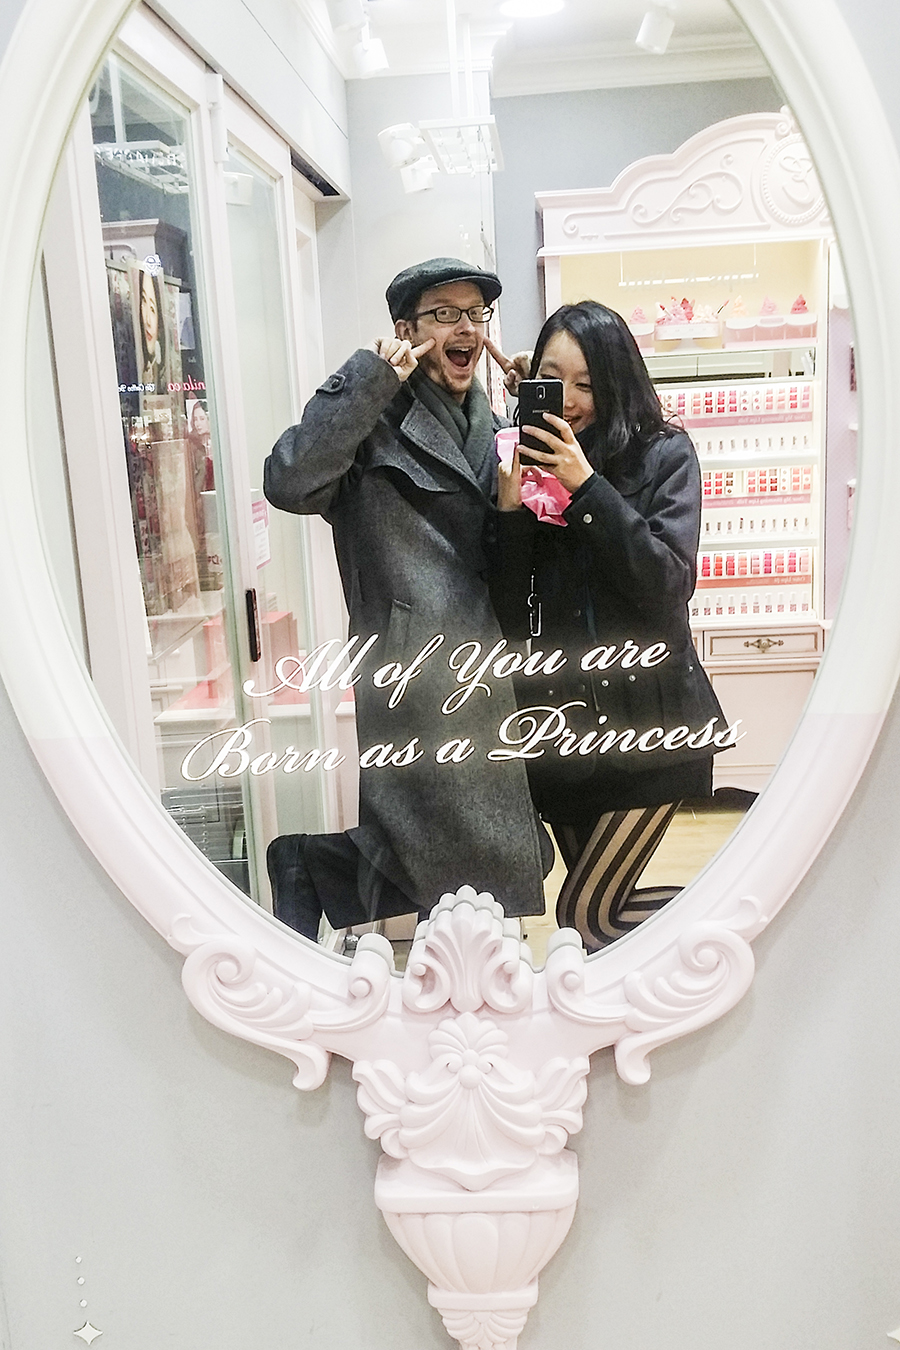 Ottie and Ren posing in front of a mirror at Etude House with the inscription: All of you are Born as a Princess, in Myeongdong, Seoul, South Korea.